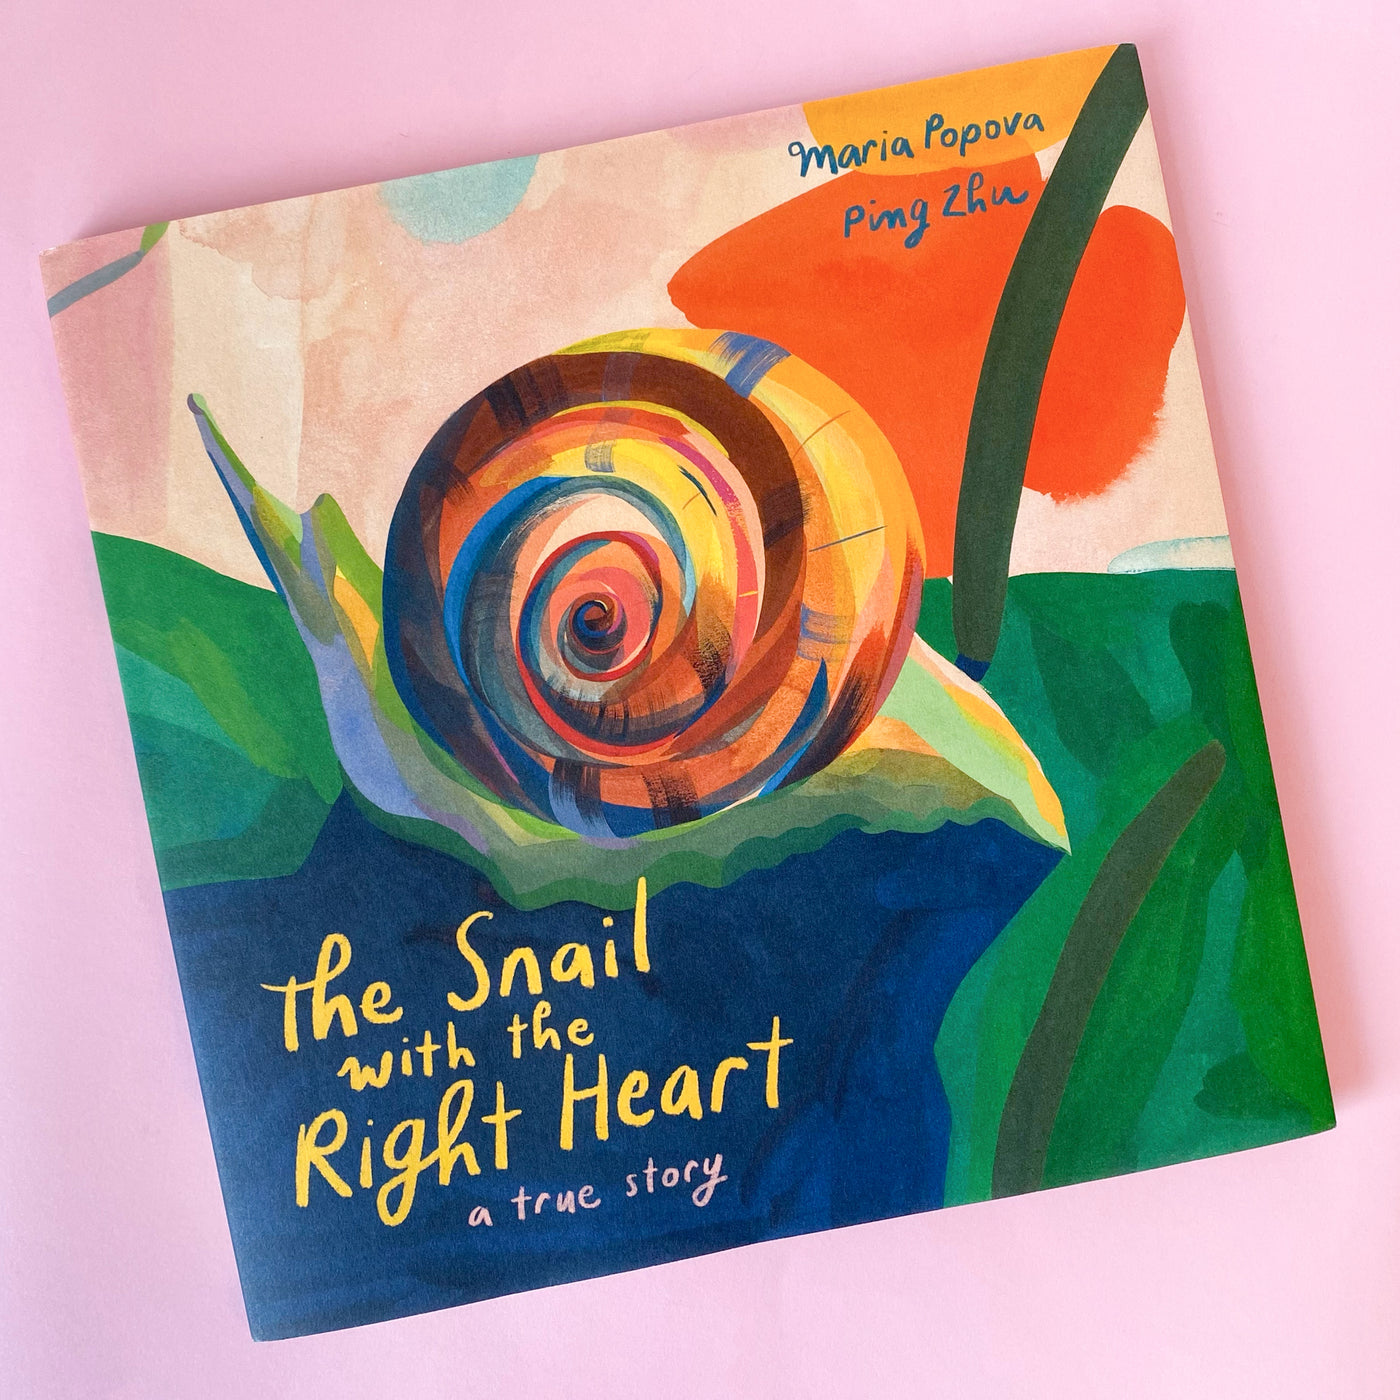 The Snail with the Right Heart: A True Story by Maria Popova and Ping Zhu